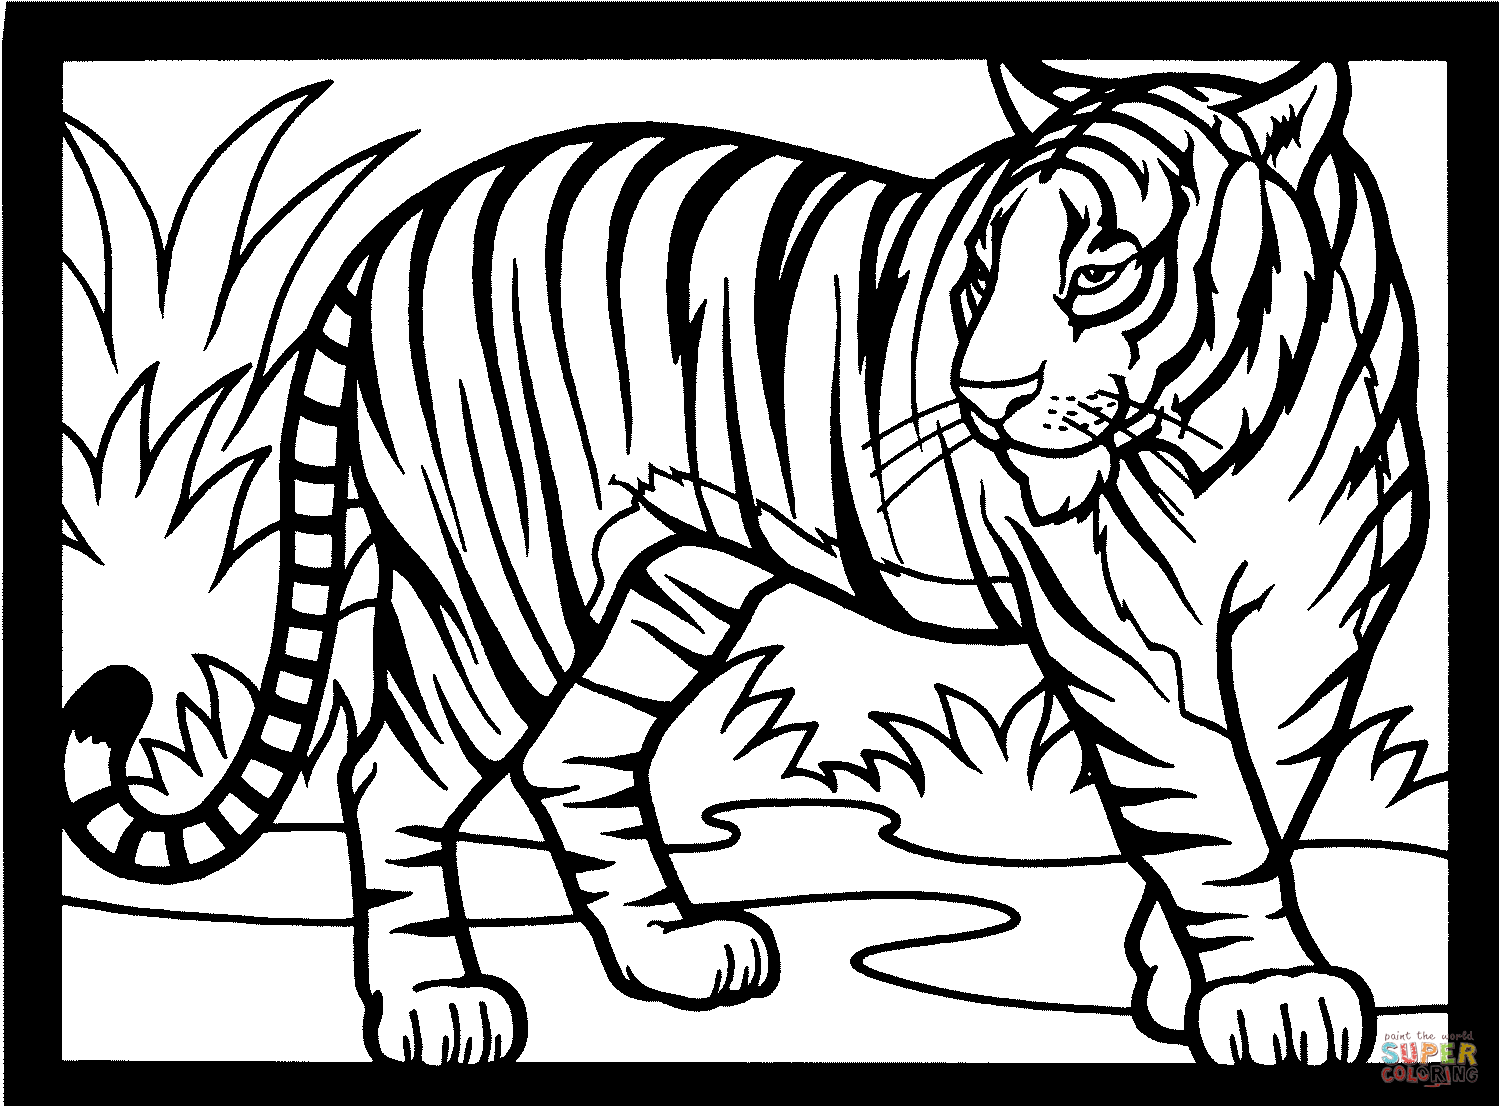 Tiiger coloring #17, Download drawings